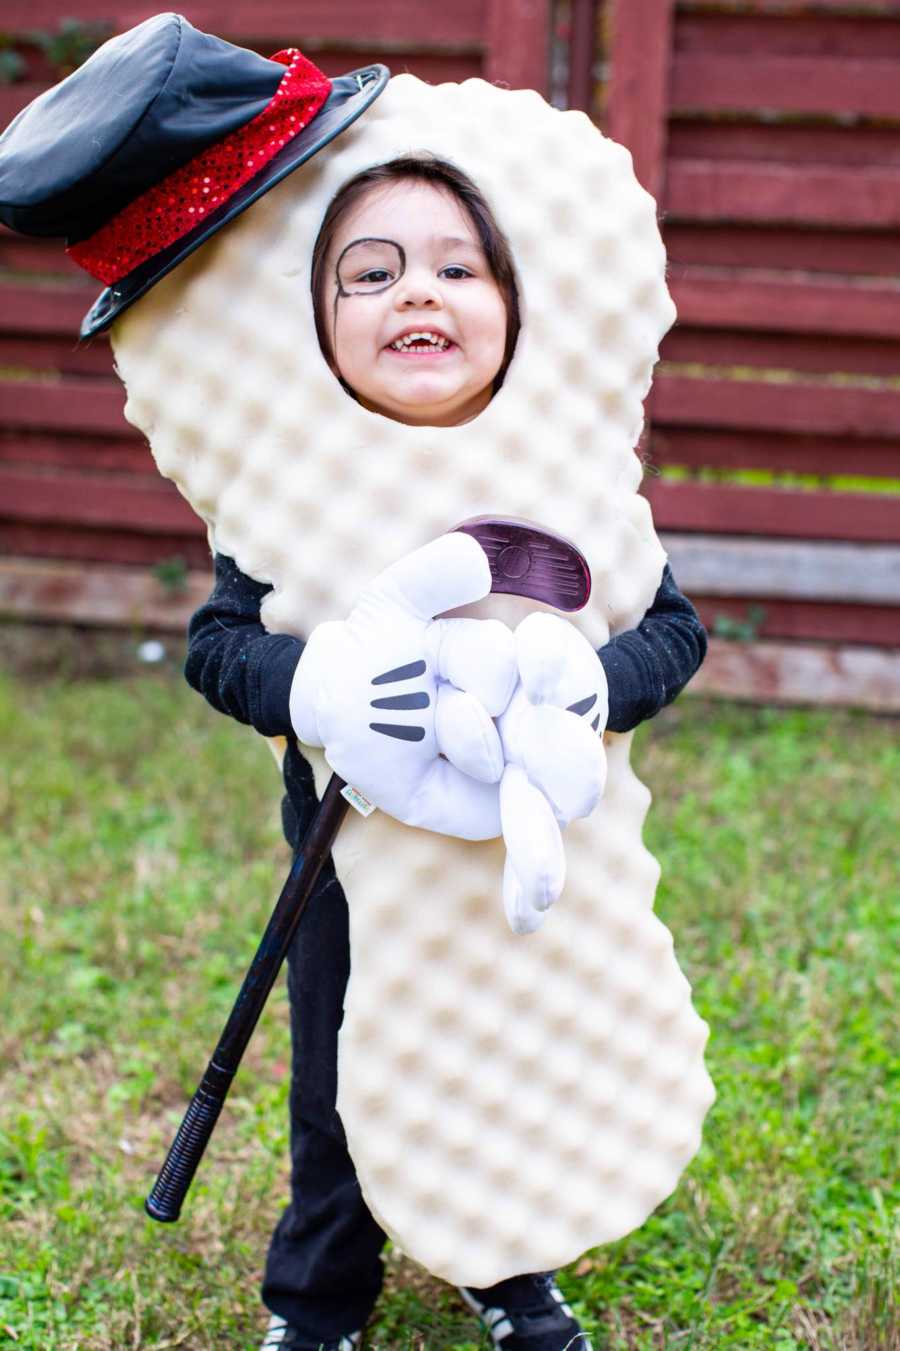 Toddler stands outside smiling in Mr. Peanut costume